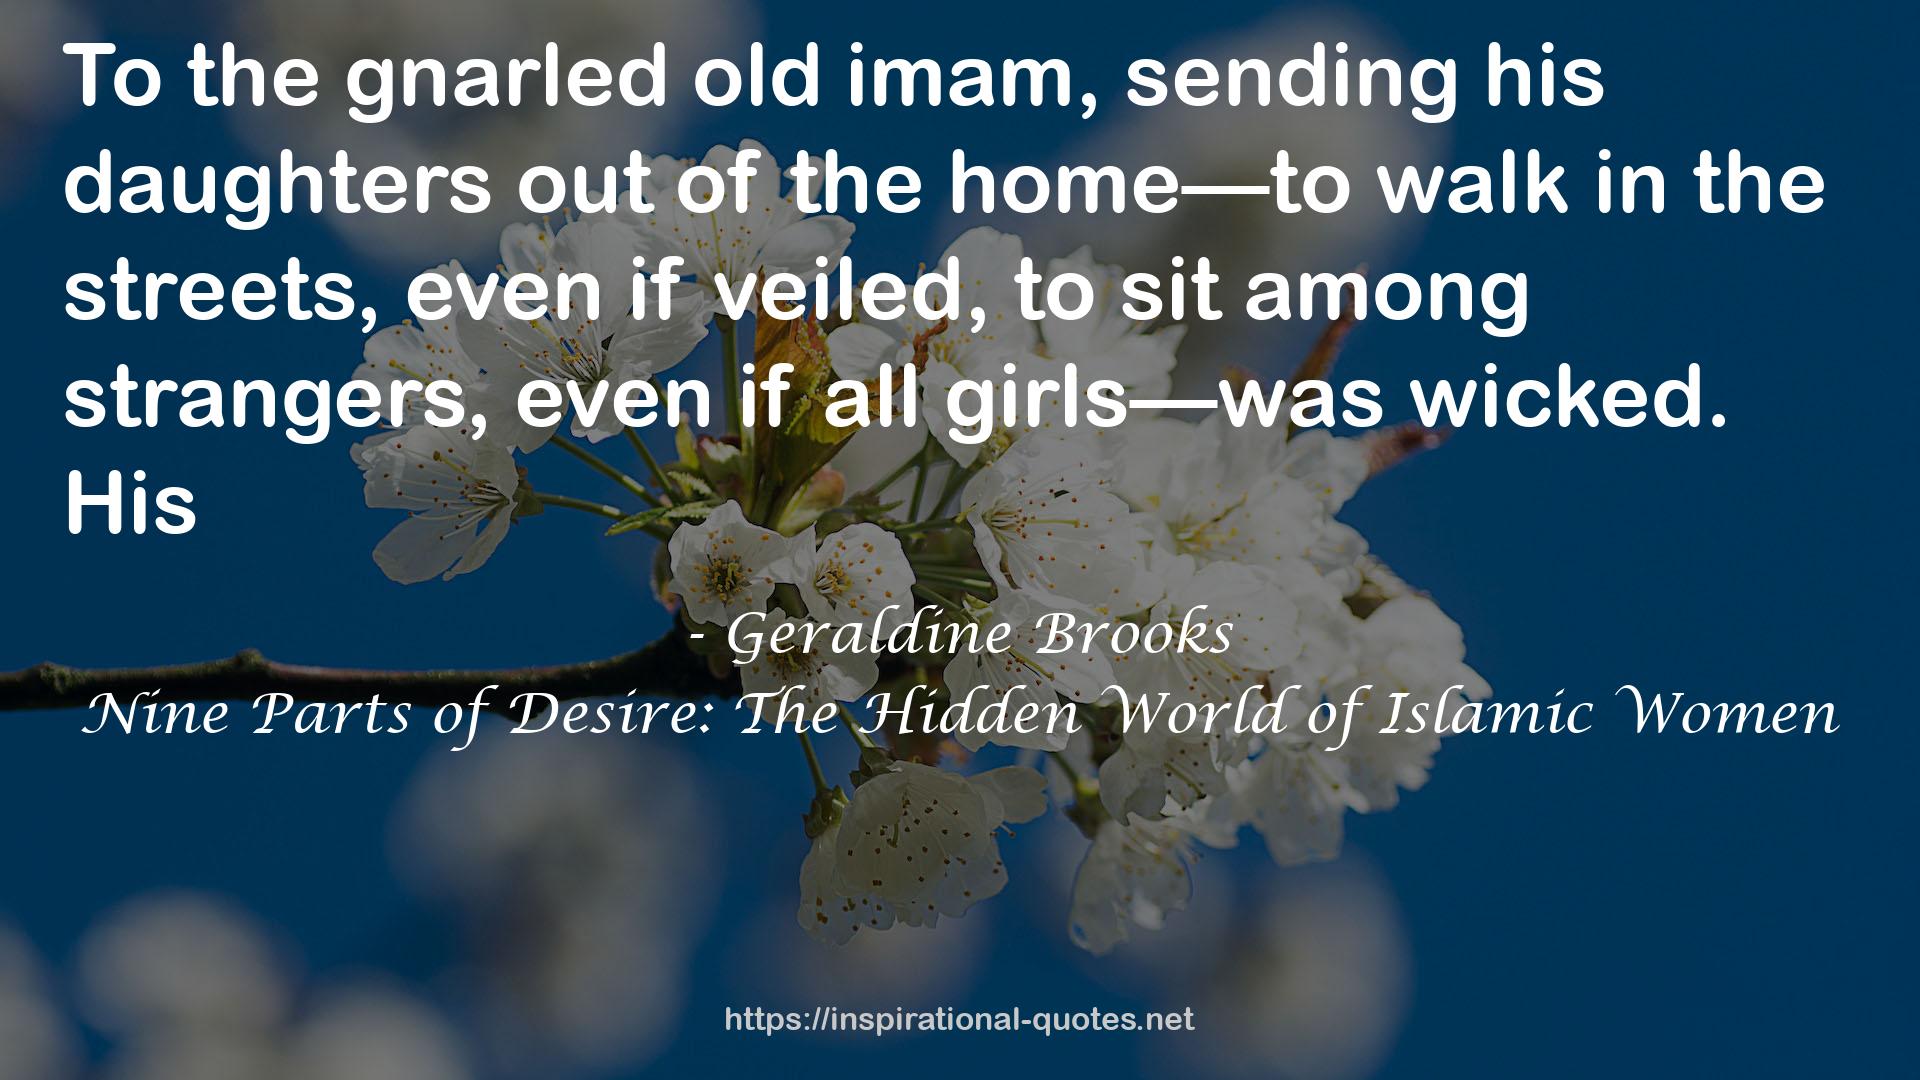 Nine Parts of Desire: The Hidden World of Islamic Women QUOTES